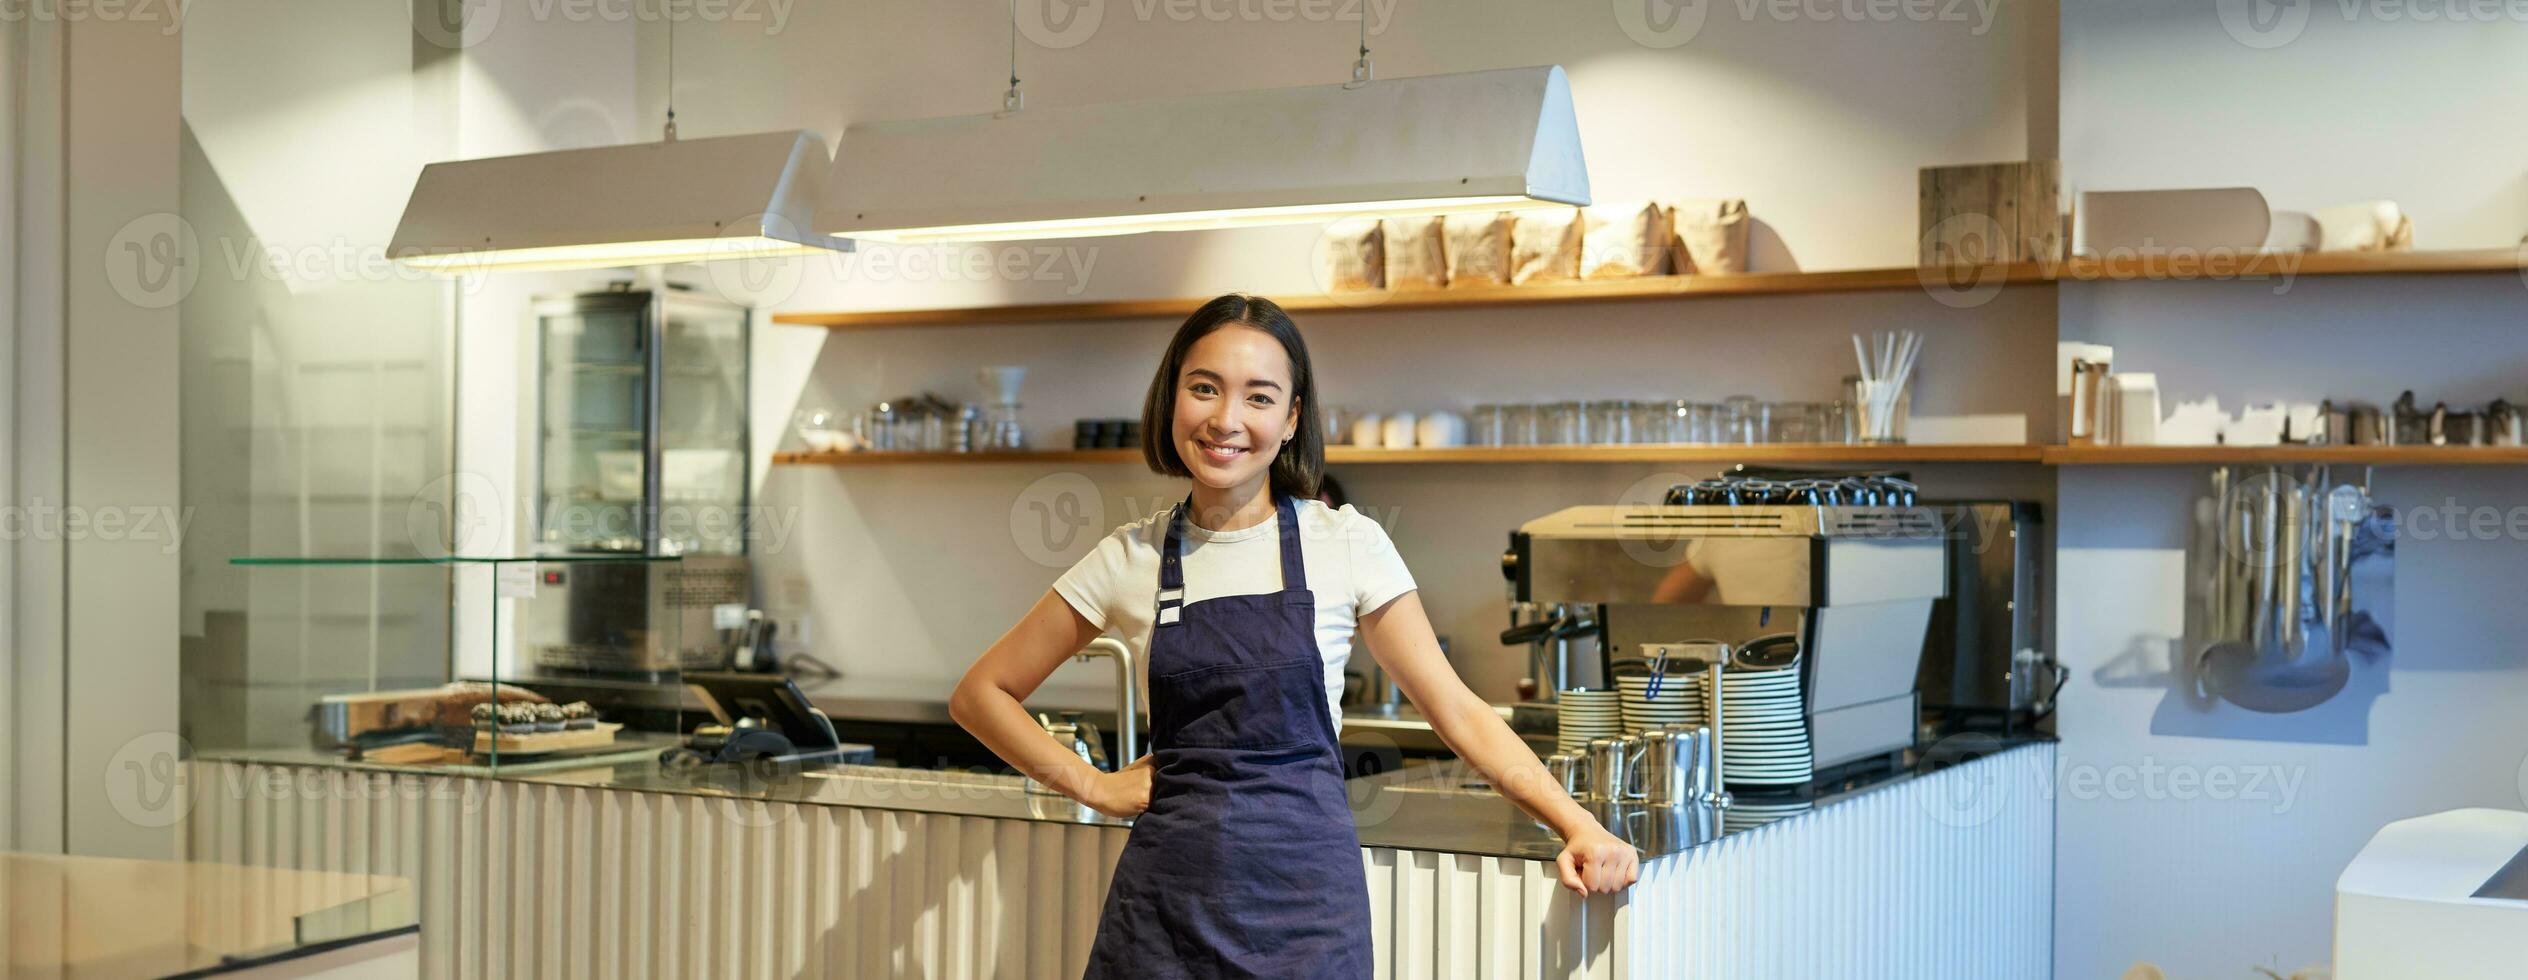 Portrait of cute asian woman barista, cafe staff standing near counter with coffee machine, wearing apron, smiling at camera photo